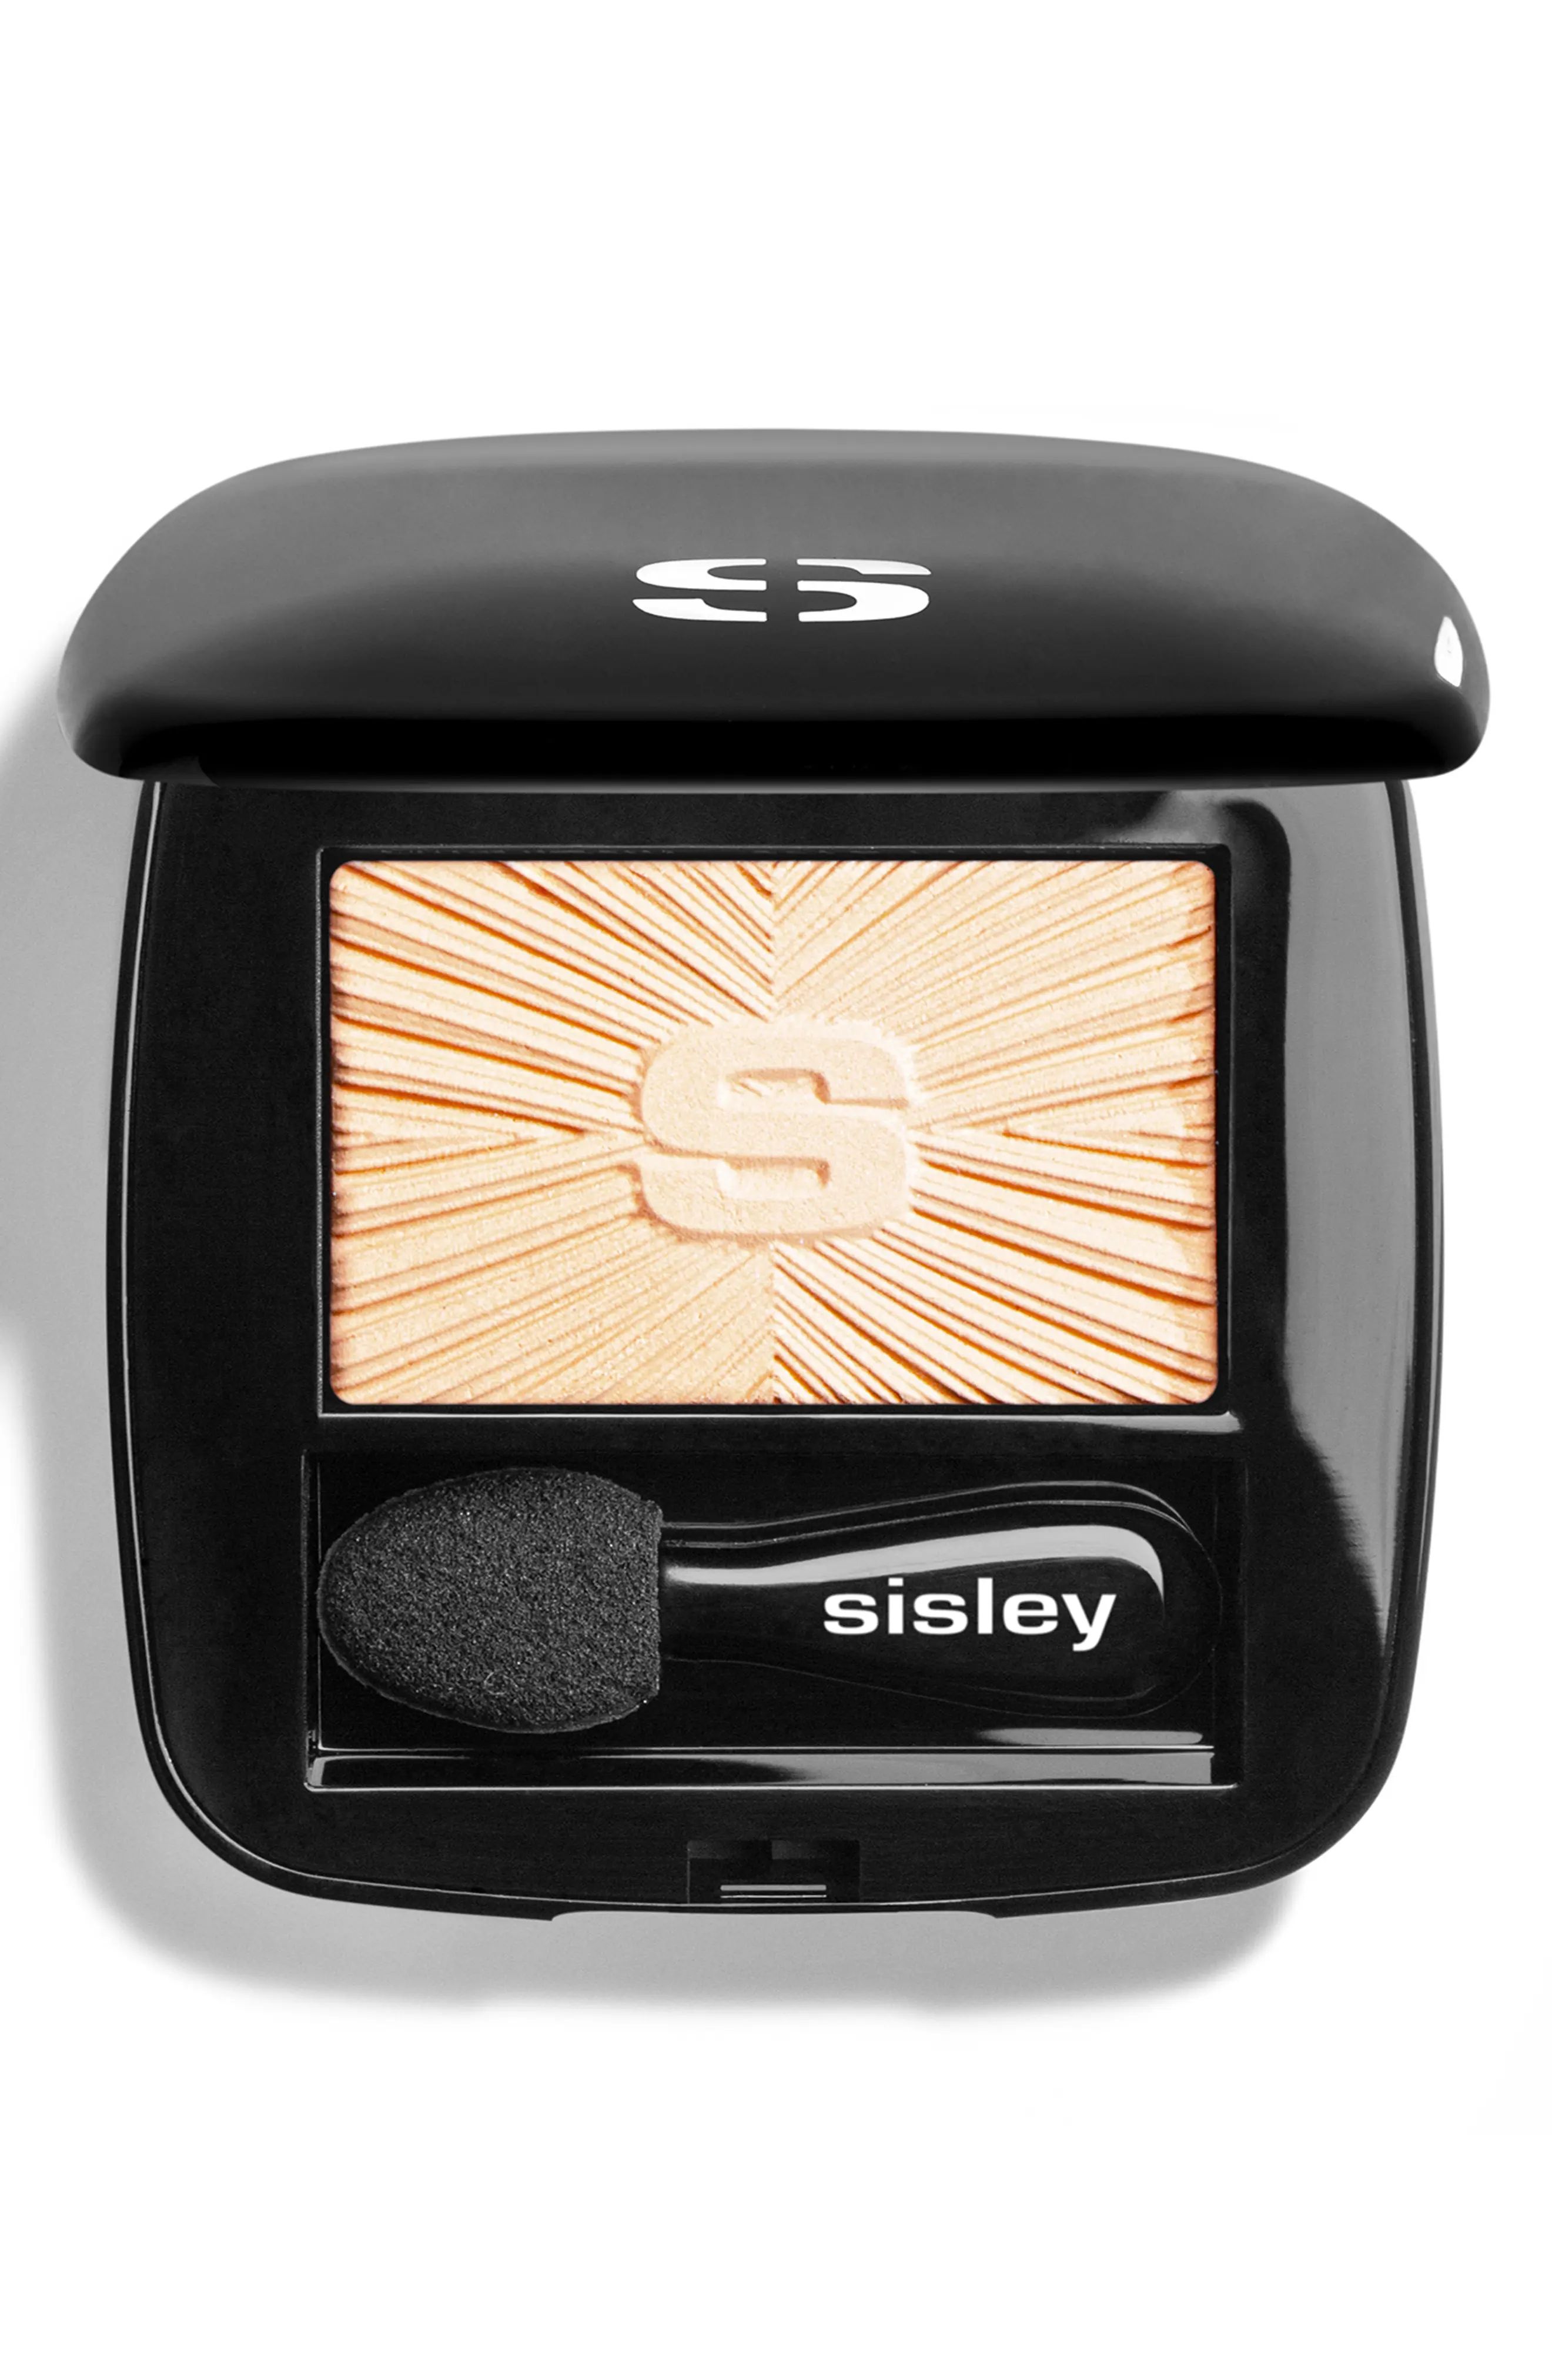 Sisley Paris Les Phyto-Ombres Eyeshadow in 10 Silky Cream at Nordstrom | Nordstrom